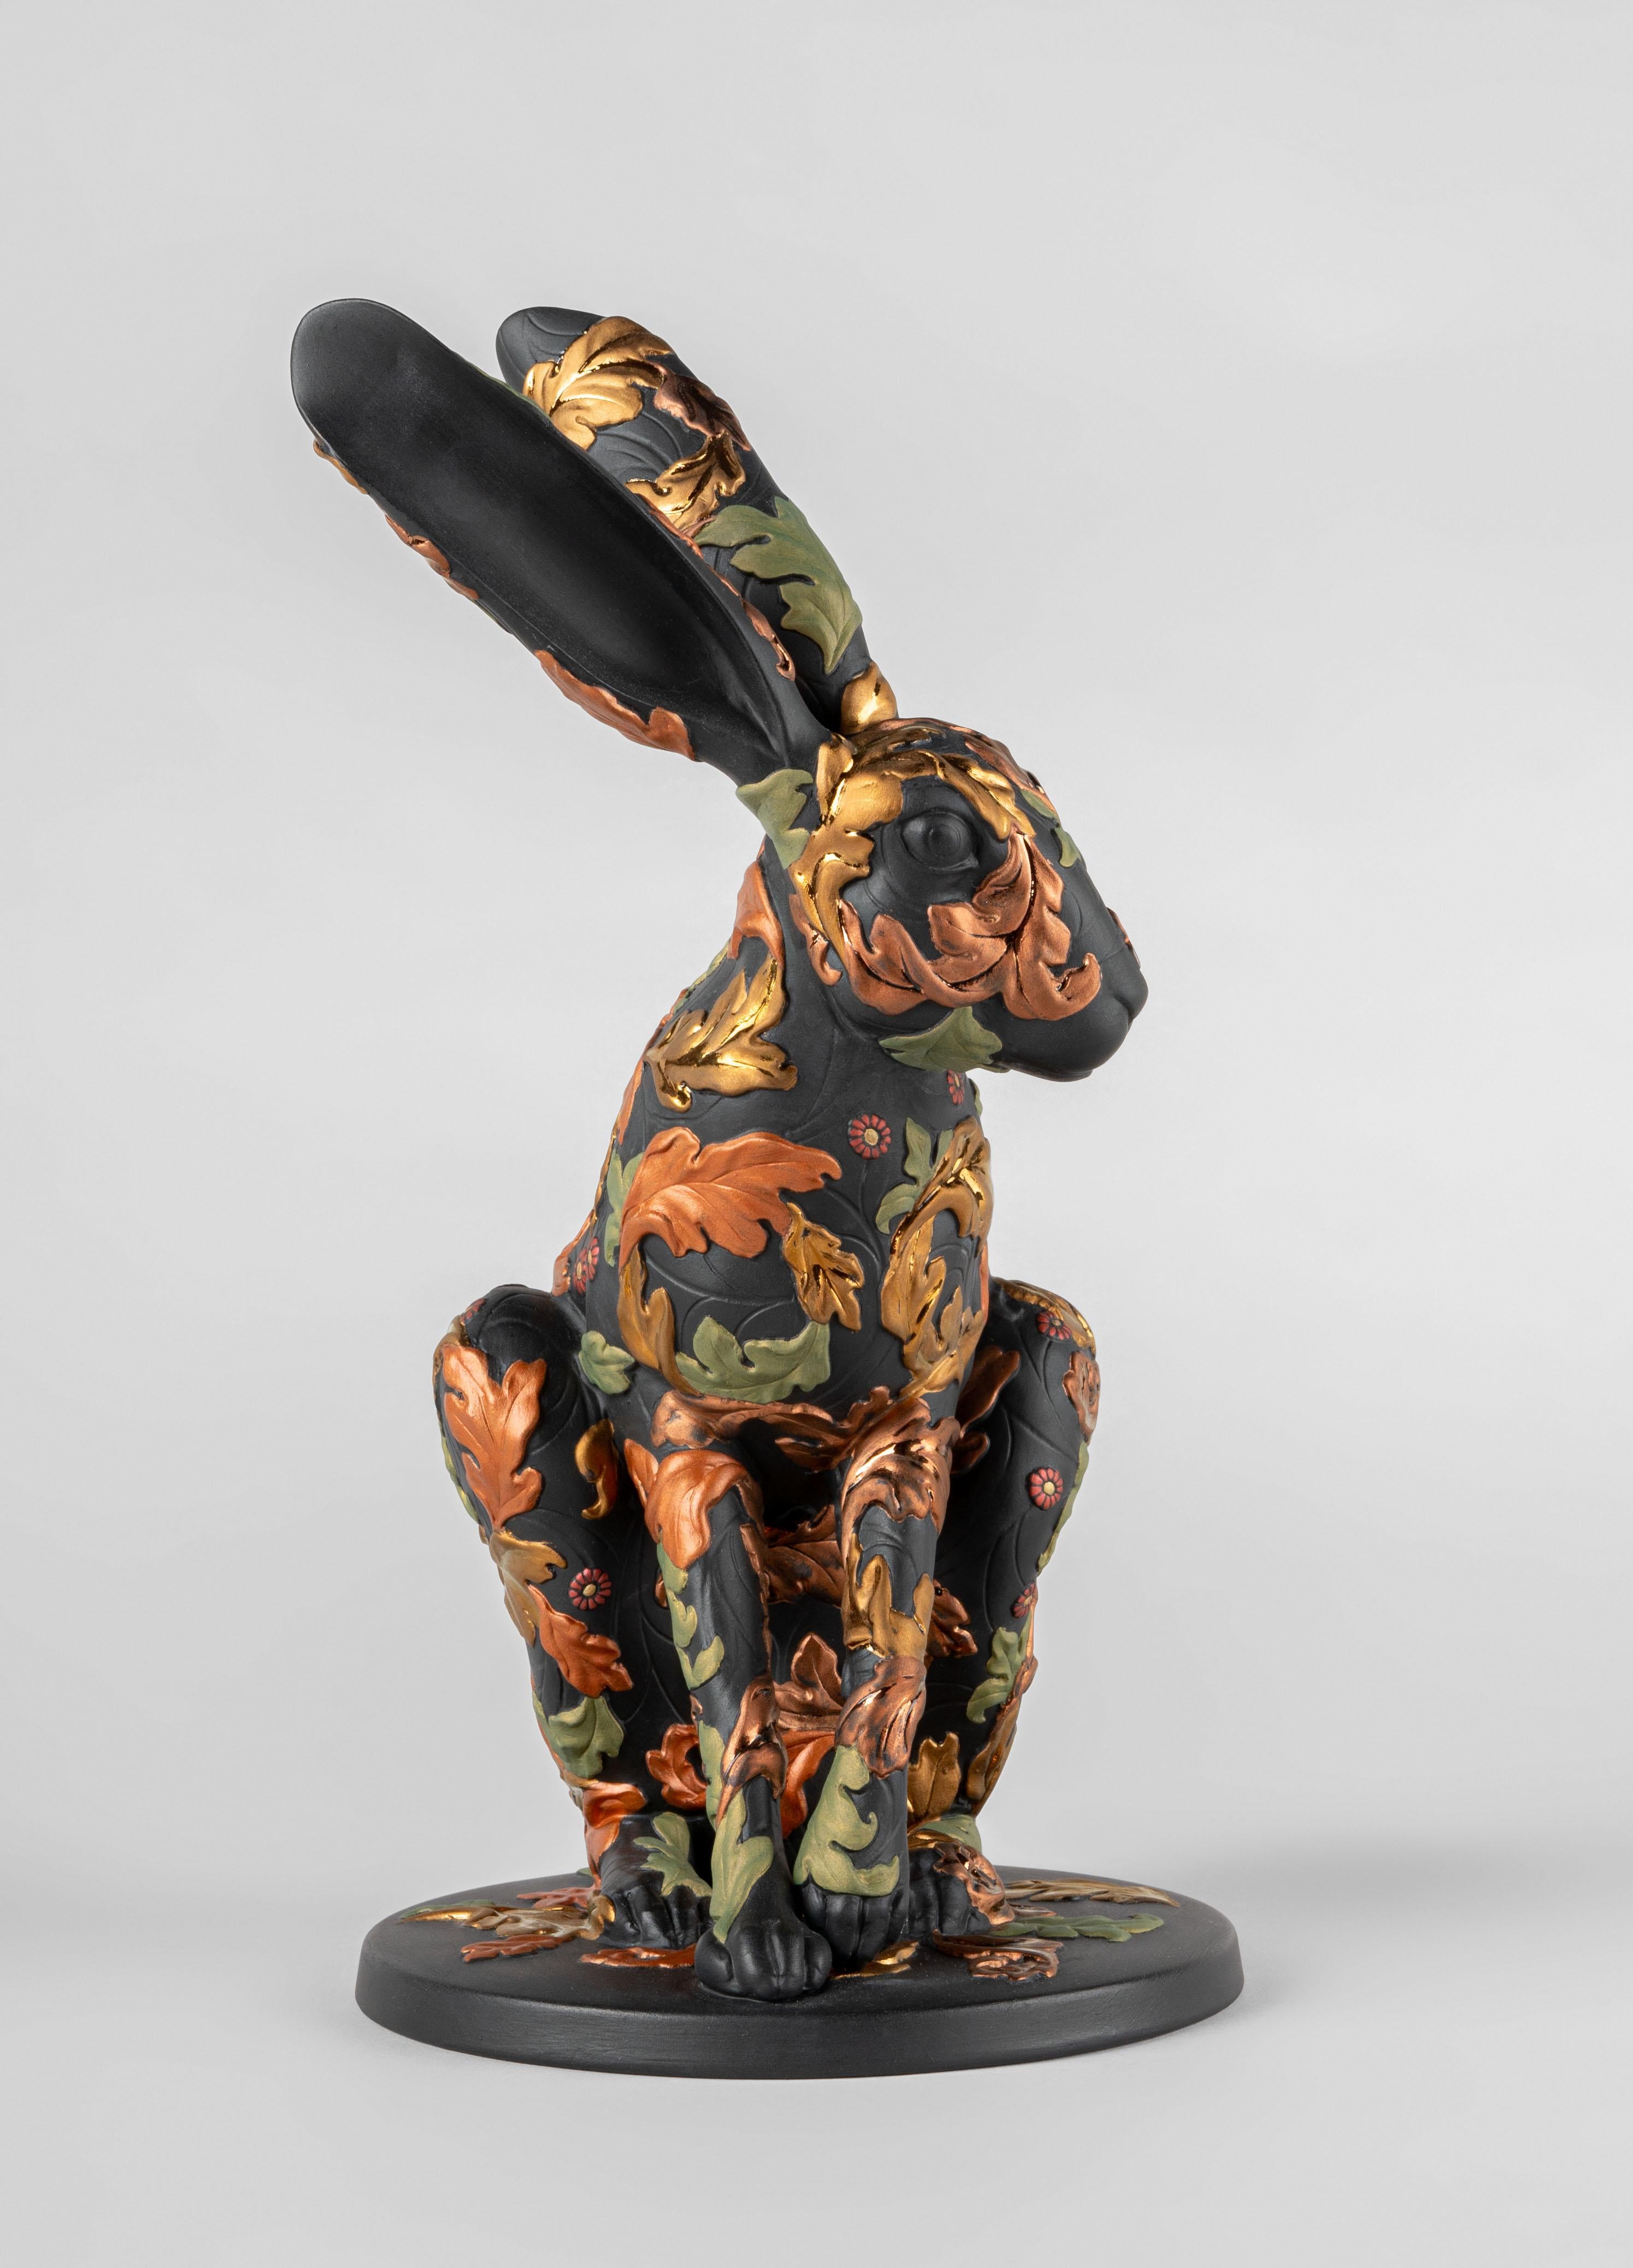 Porcelain sculpture depicting a hare, inspired by the plant motifs of the designer William Morris, one of the all-time masters of the decorative arts. This sculpture, made in matte black porcelain, depicts an exquisitely ornamented hare inspired by